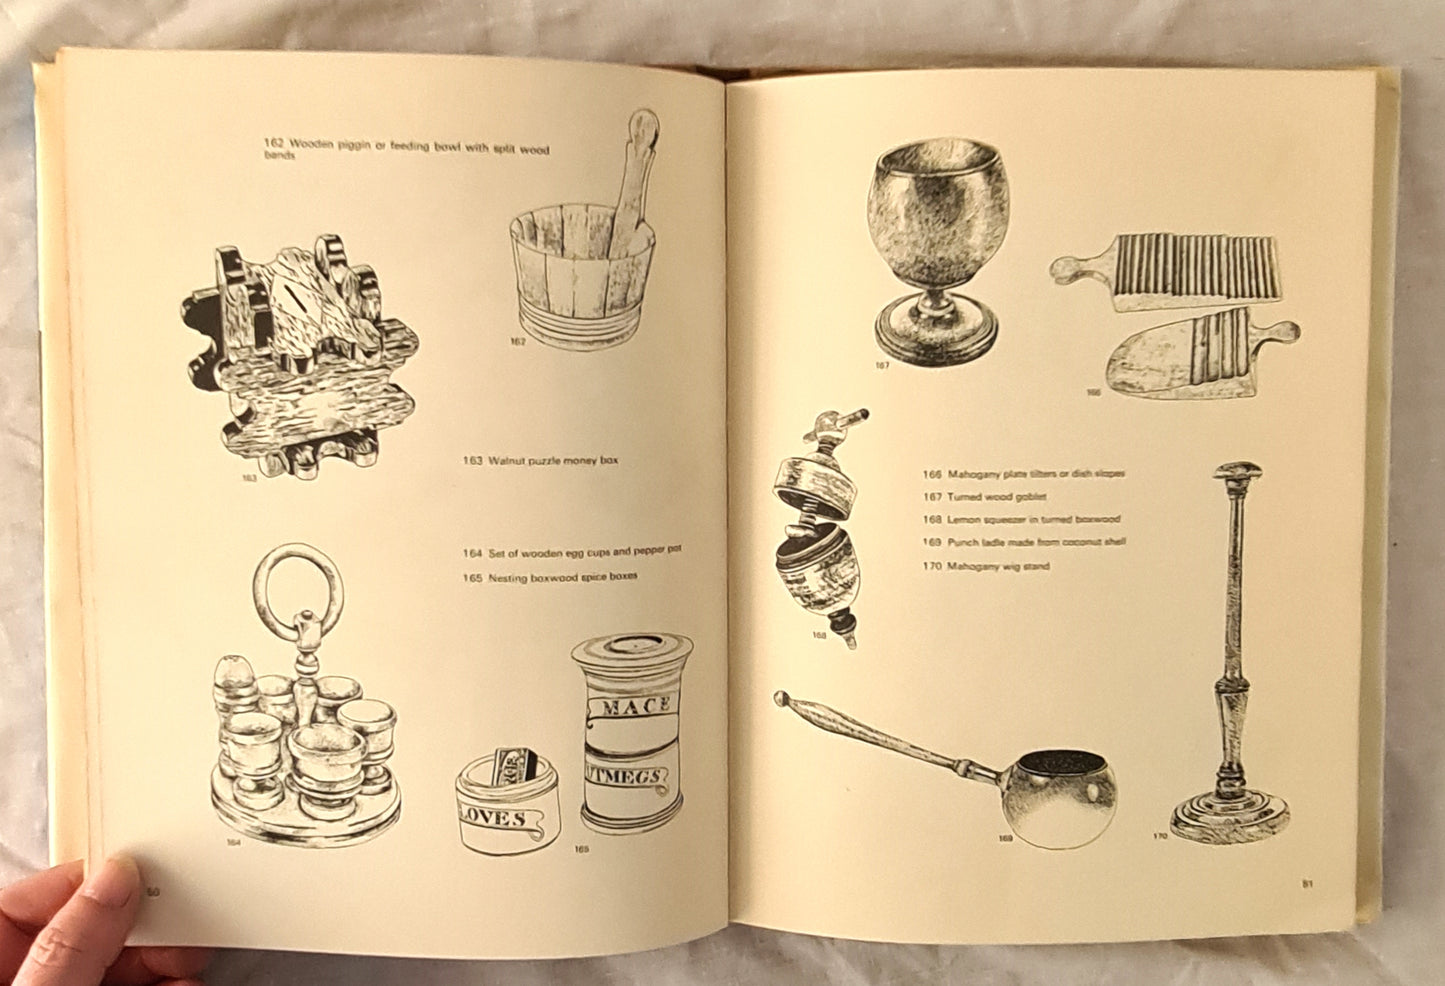 British Domestic Design Through the Ages by Brian Keogh and Melvyn Gill